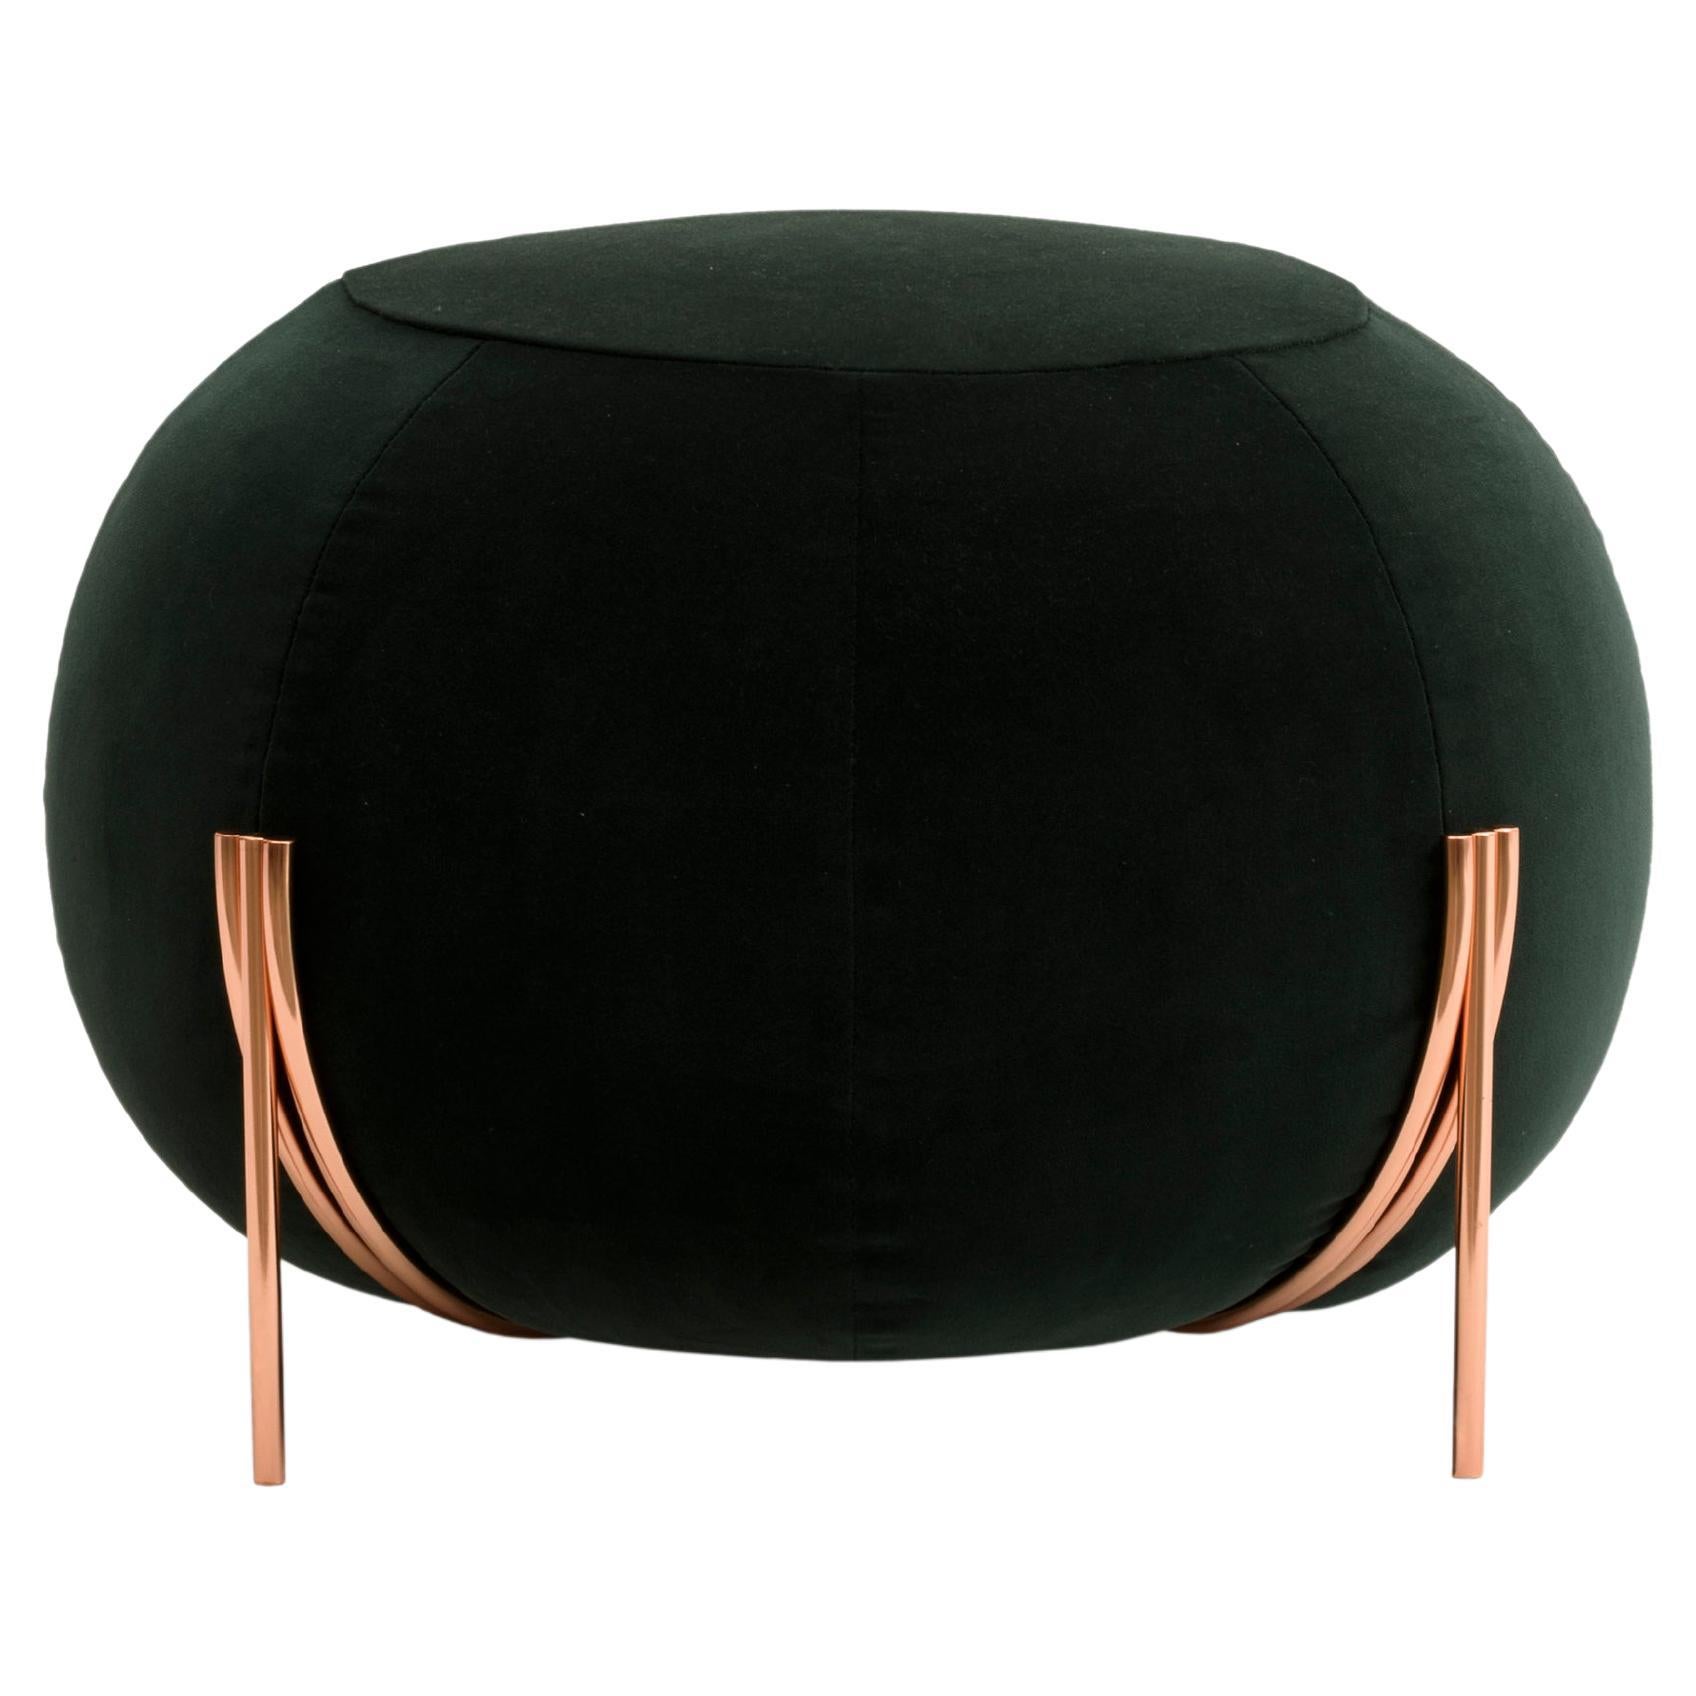 Geo Small Pouf in Vegas Velvet Green Upholstery & Copper Legs by Paolo Grasselli For Sale